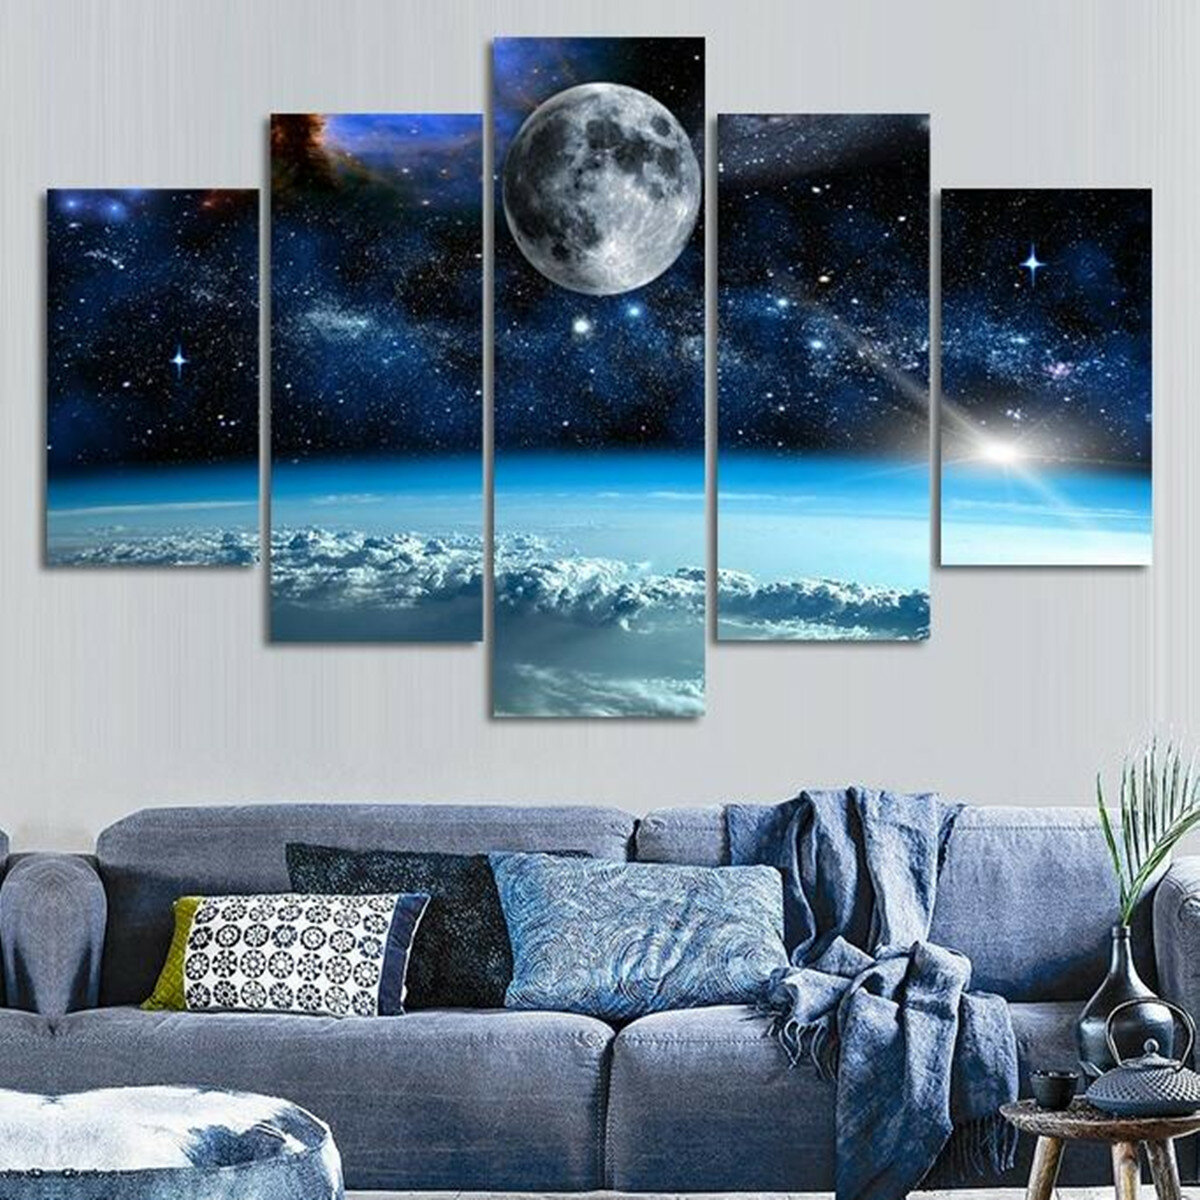 

5Pcs Canvas Print Paintings Universe Wall Decorative Printing Art Pictures Frameless Wall Hanging Decorations for Home O